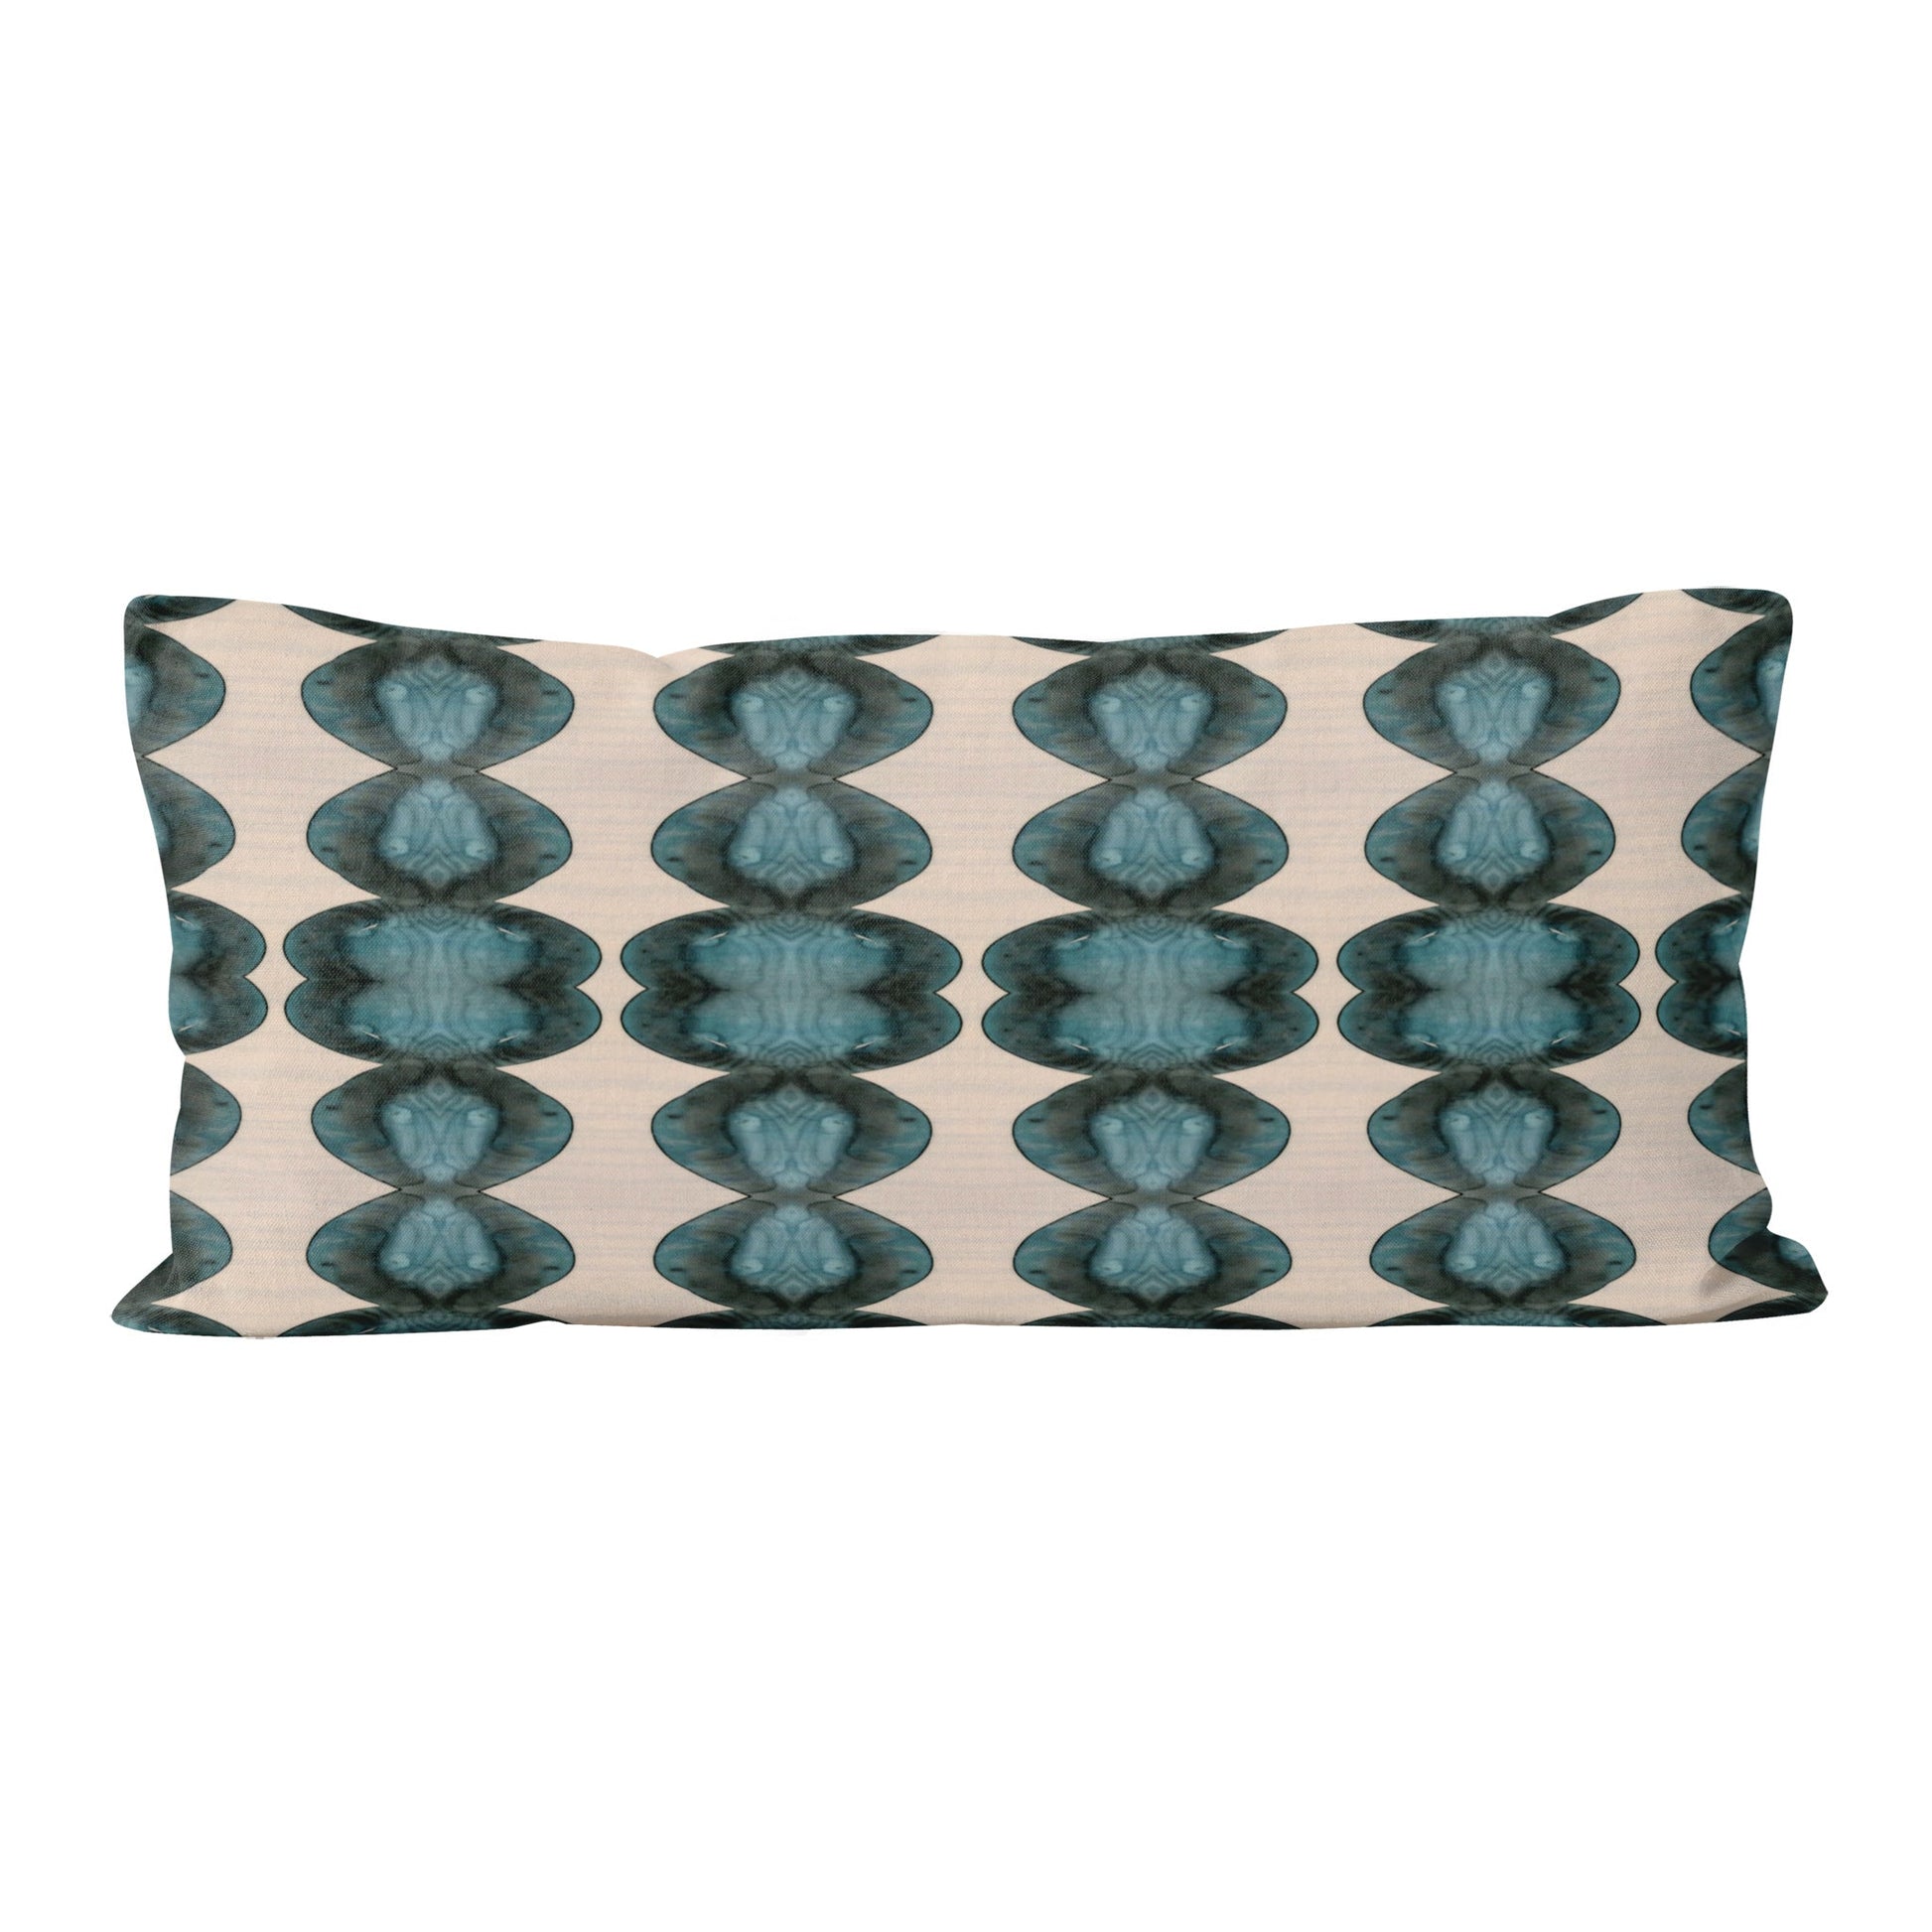 Rectangular lumbar pillow featuring abstract hand-painted pattern in blue, black, and cream.